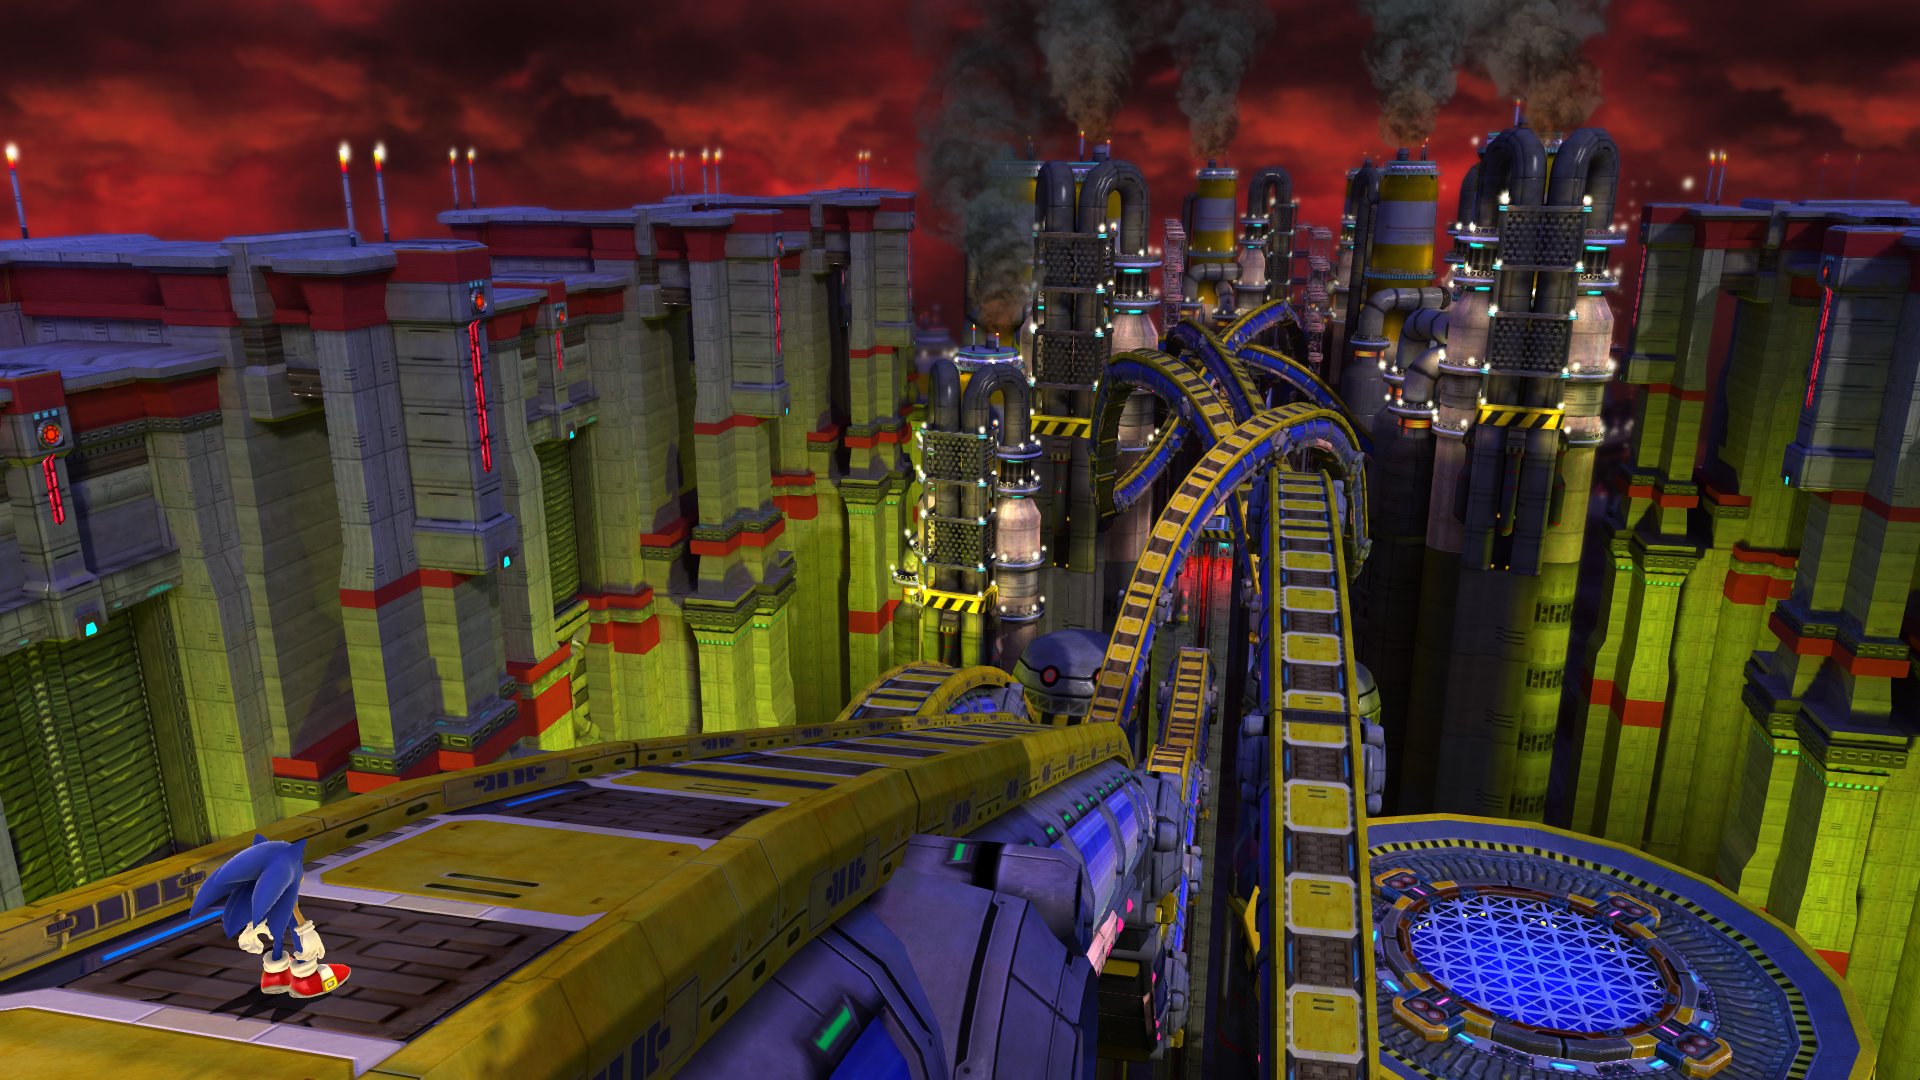 chemical plant zone